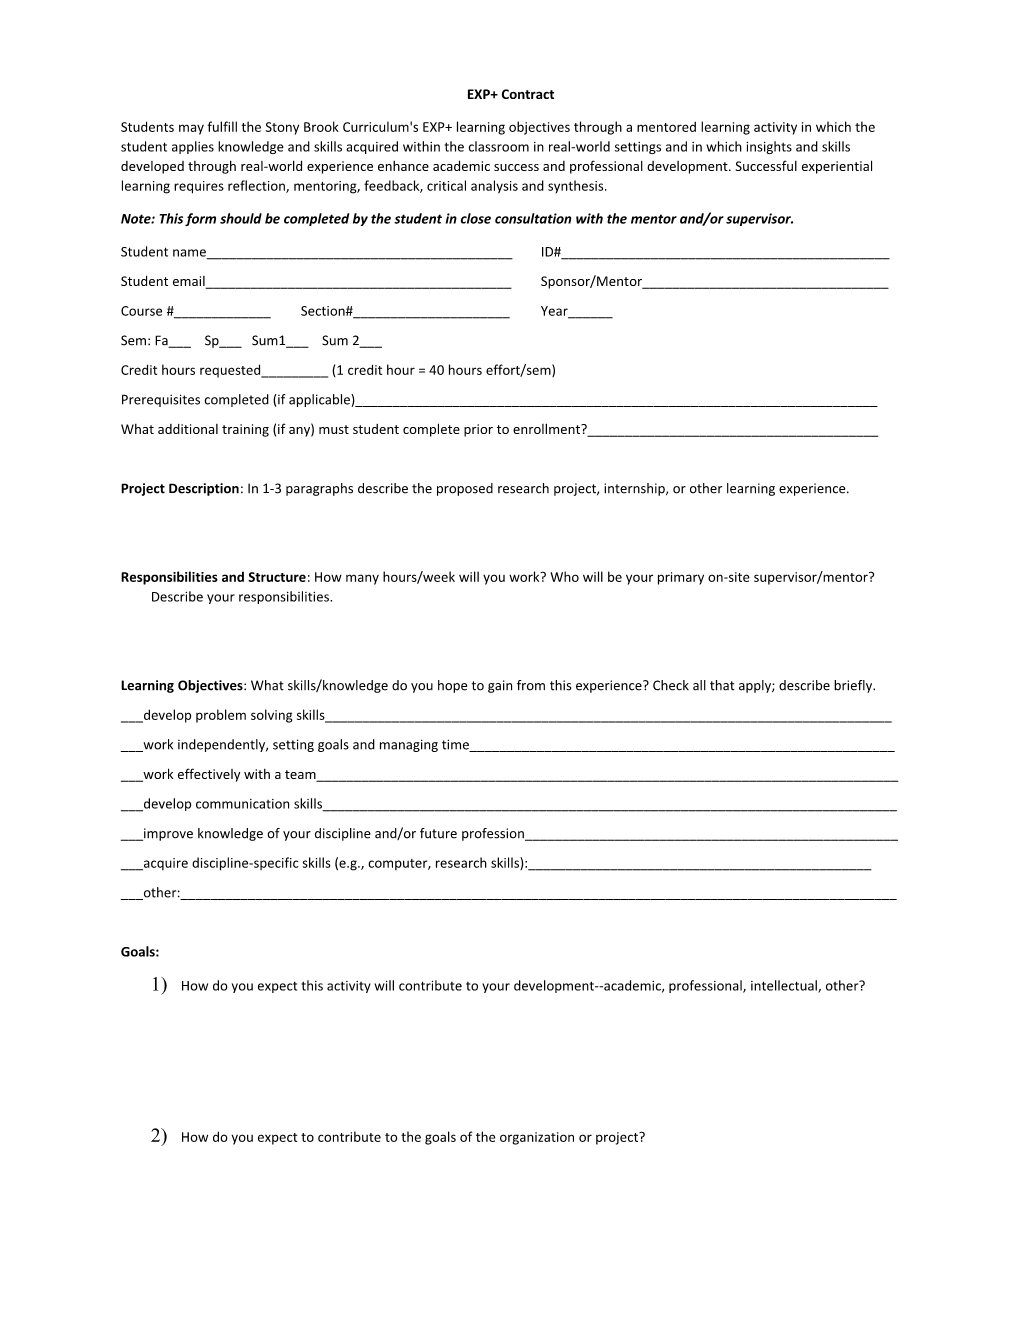 Note: This Form Should Be Completed by the Student in Close Consultation with the Mentor